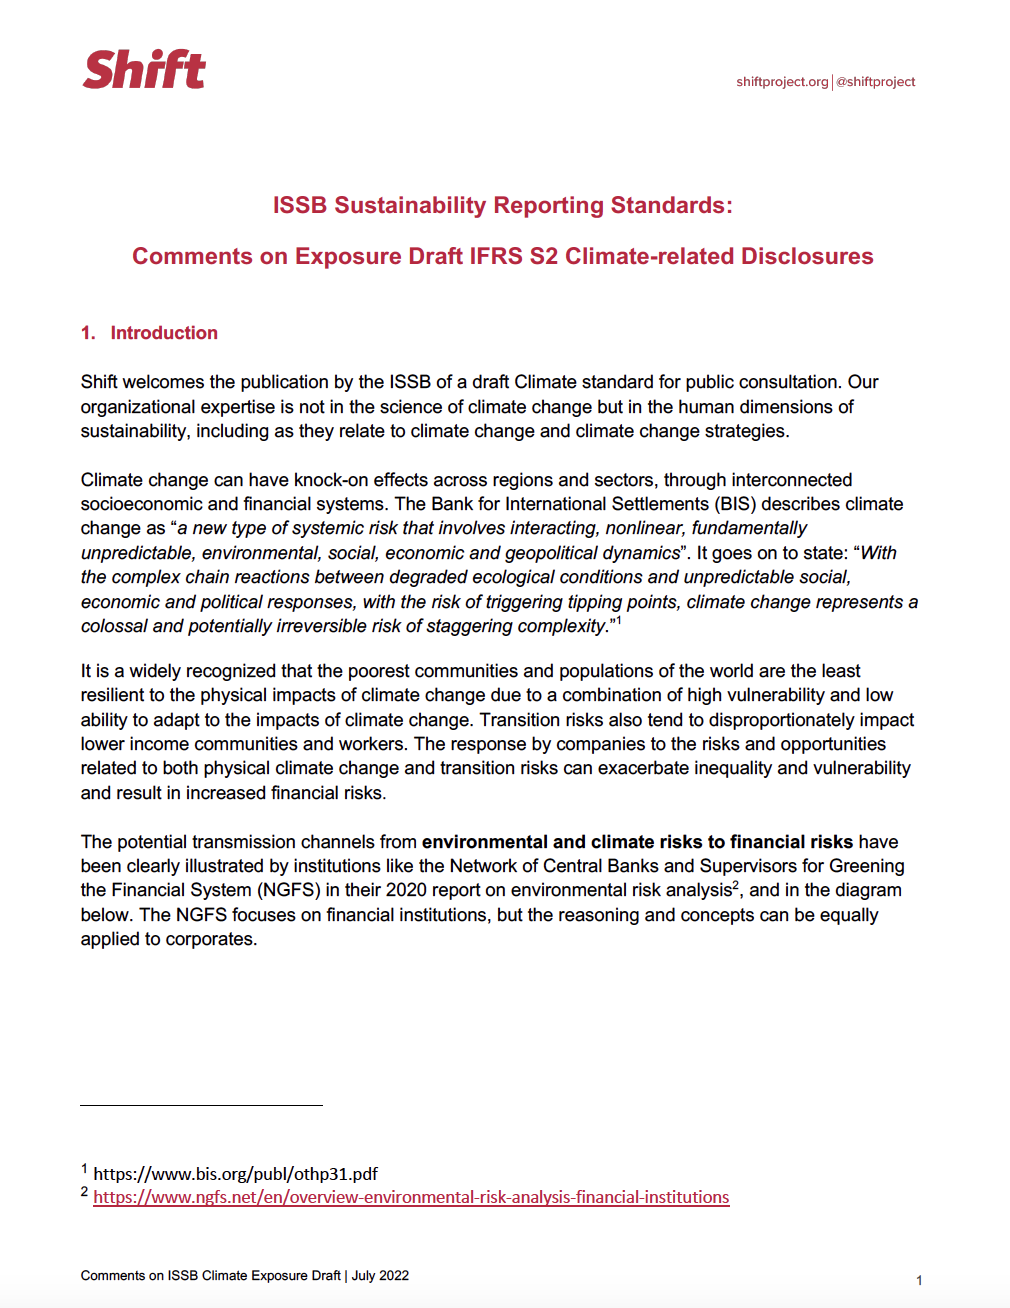 Comments by Shift on the ISSB Exposure Draft (Climate-Related Disclosures) 